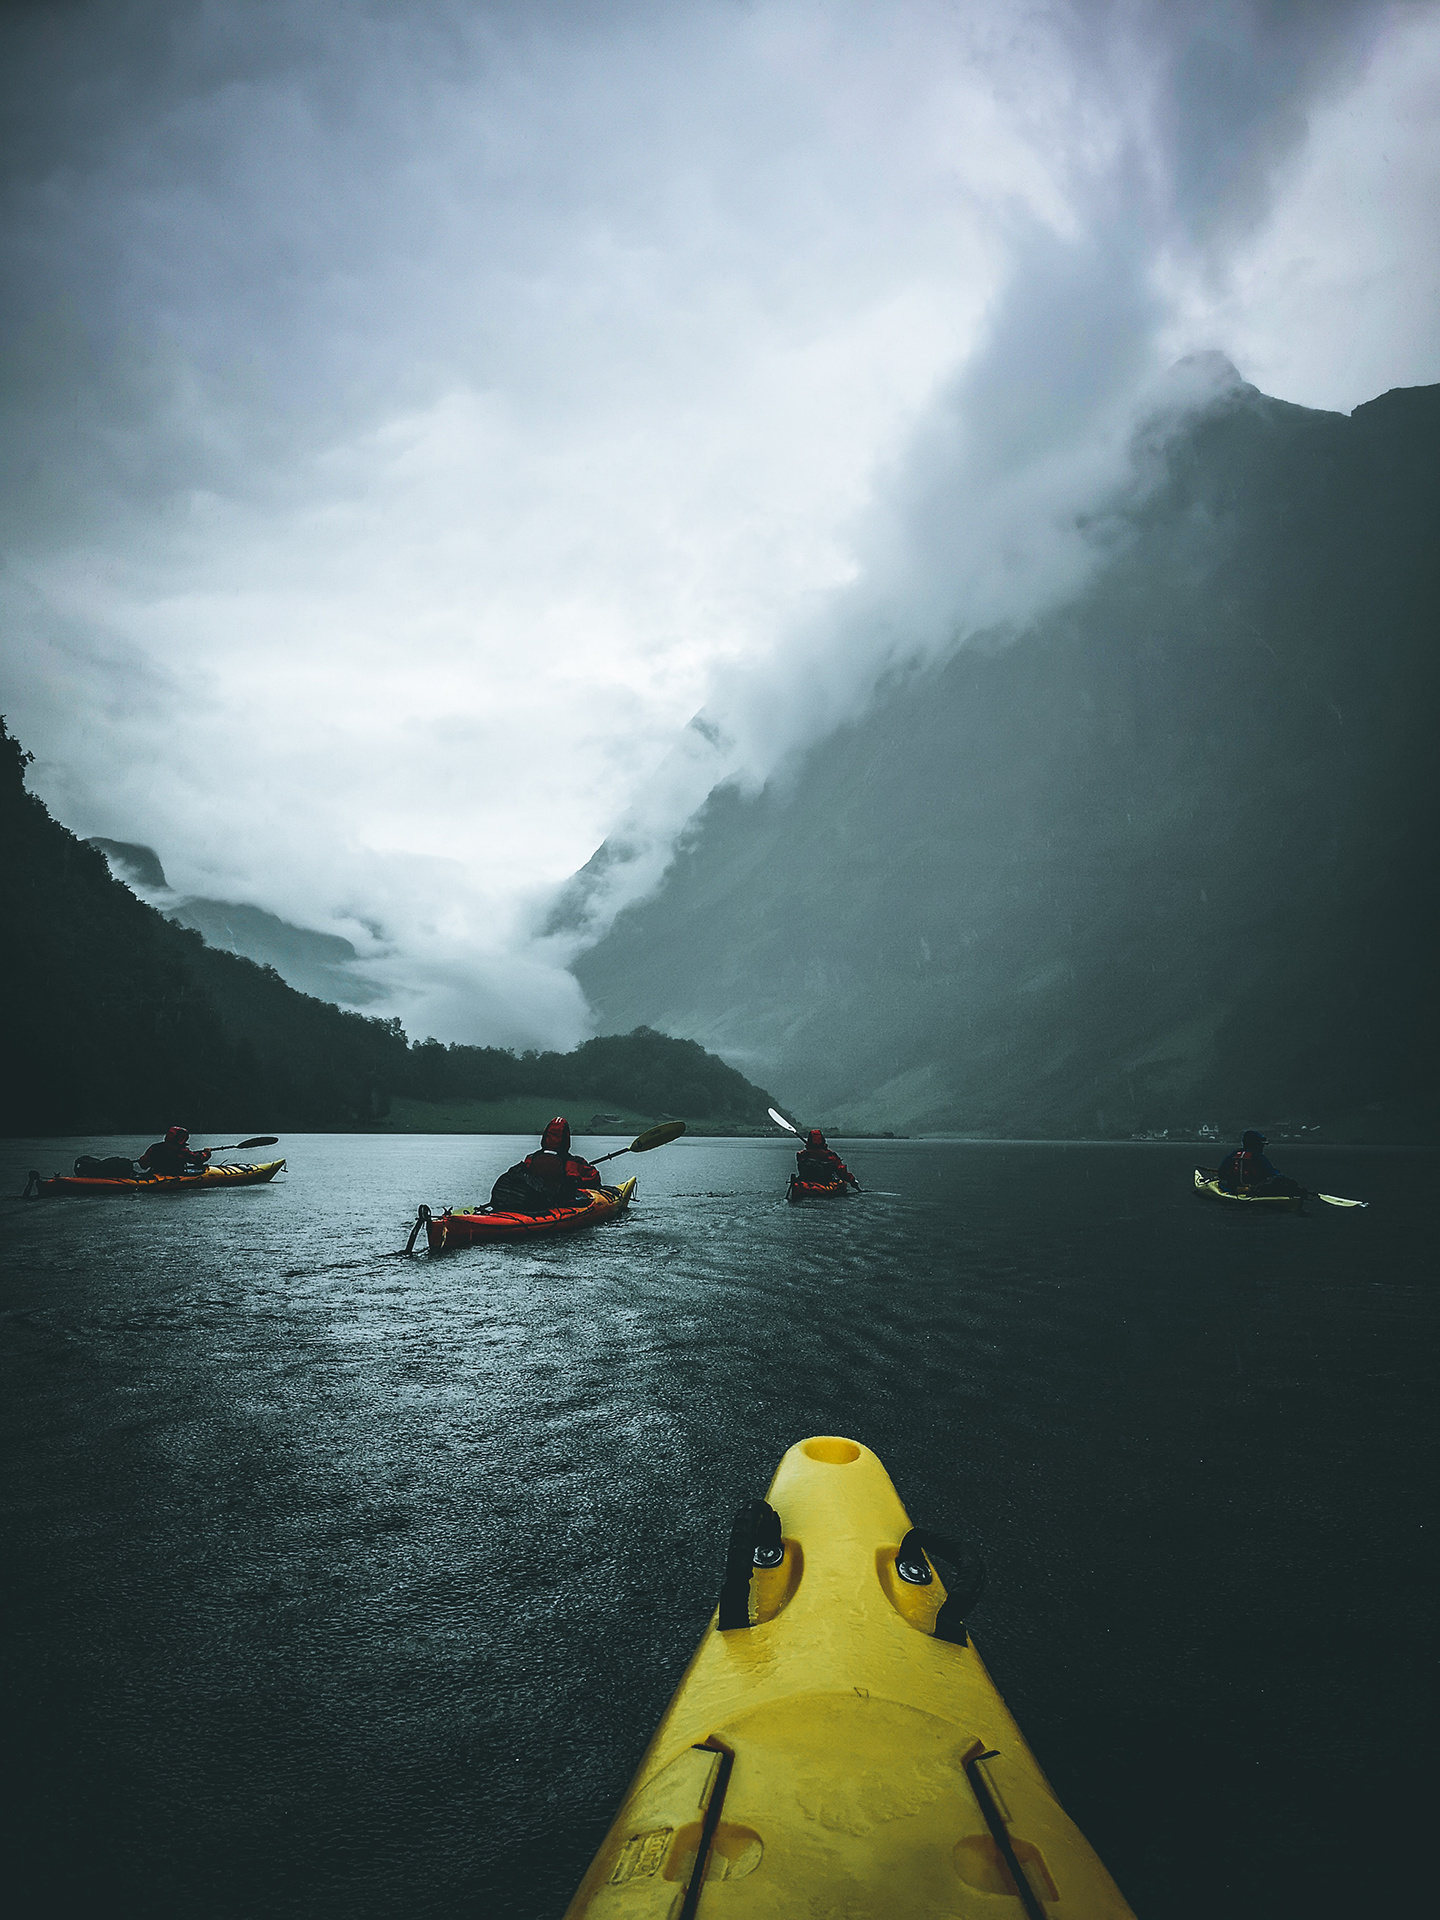 Canoeing: An extended water trip to the far side of a mountain lake. 1440x1920 HD Wallpaper.